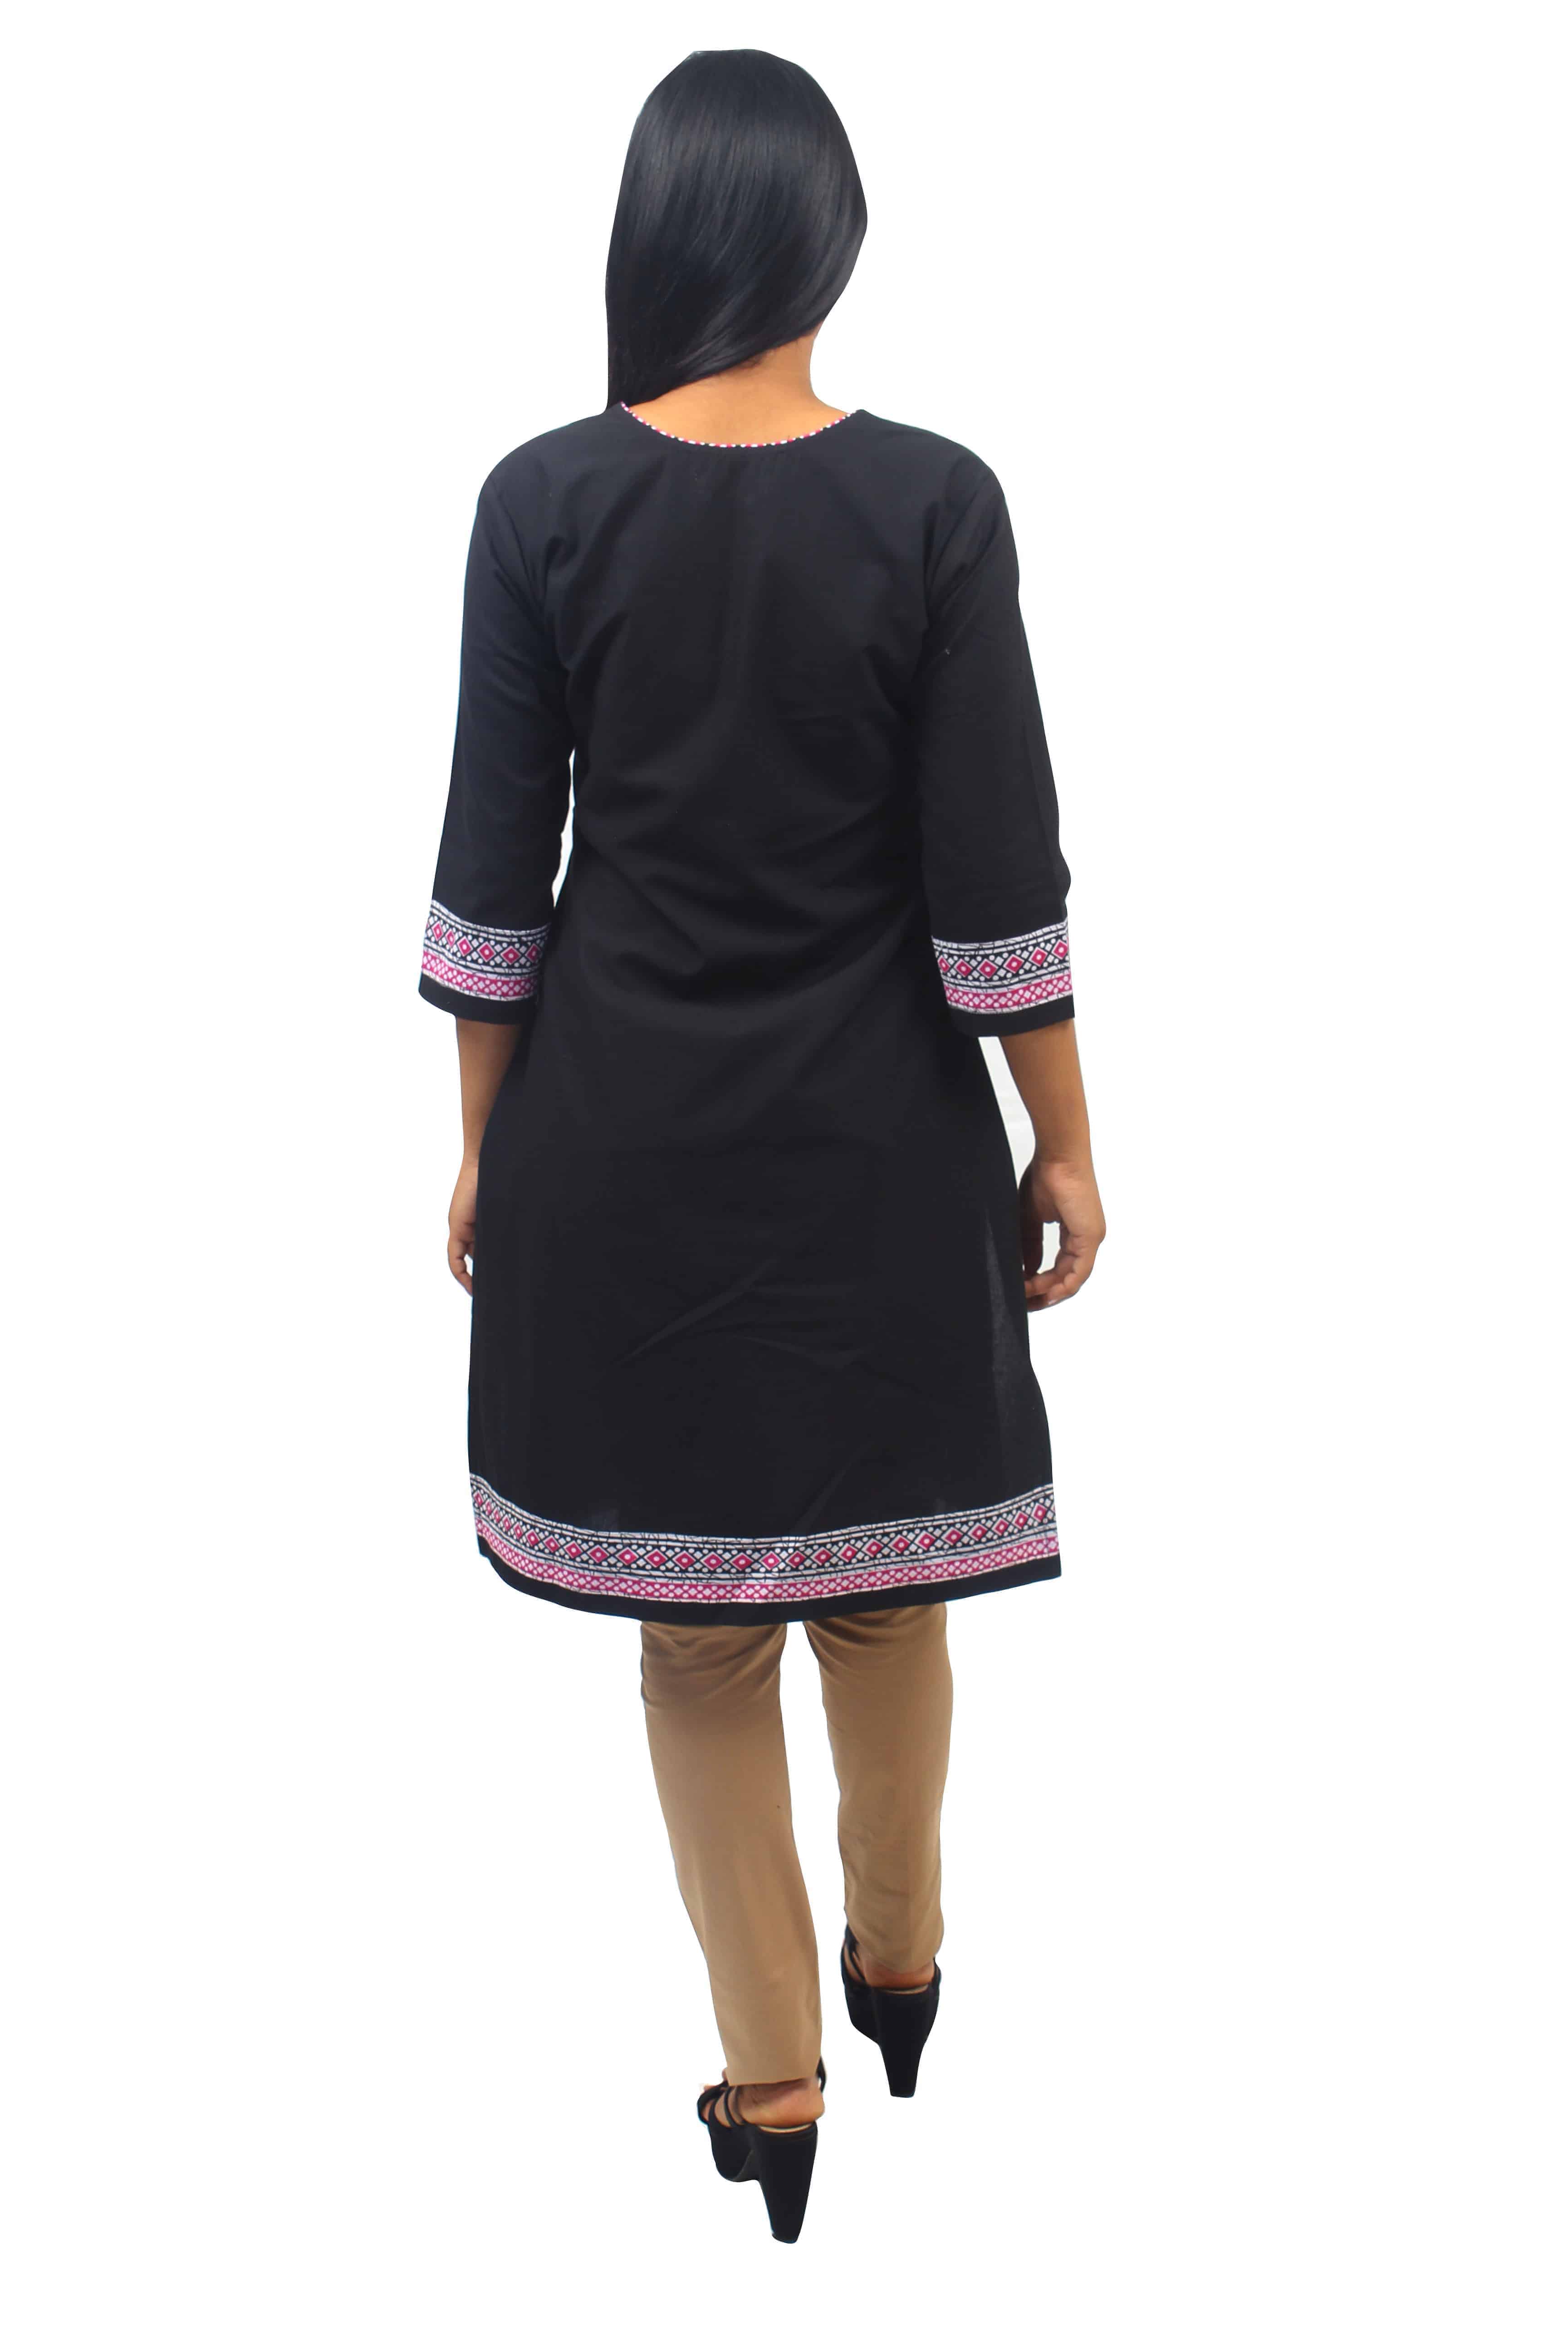 Black Cotton kurti with Pink & White Geometric Color Printed Fabric Details-ROK066